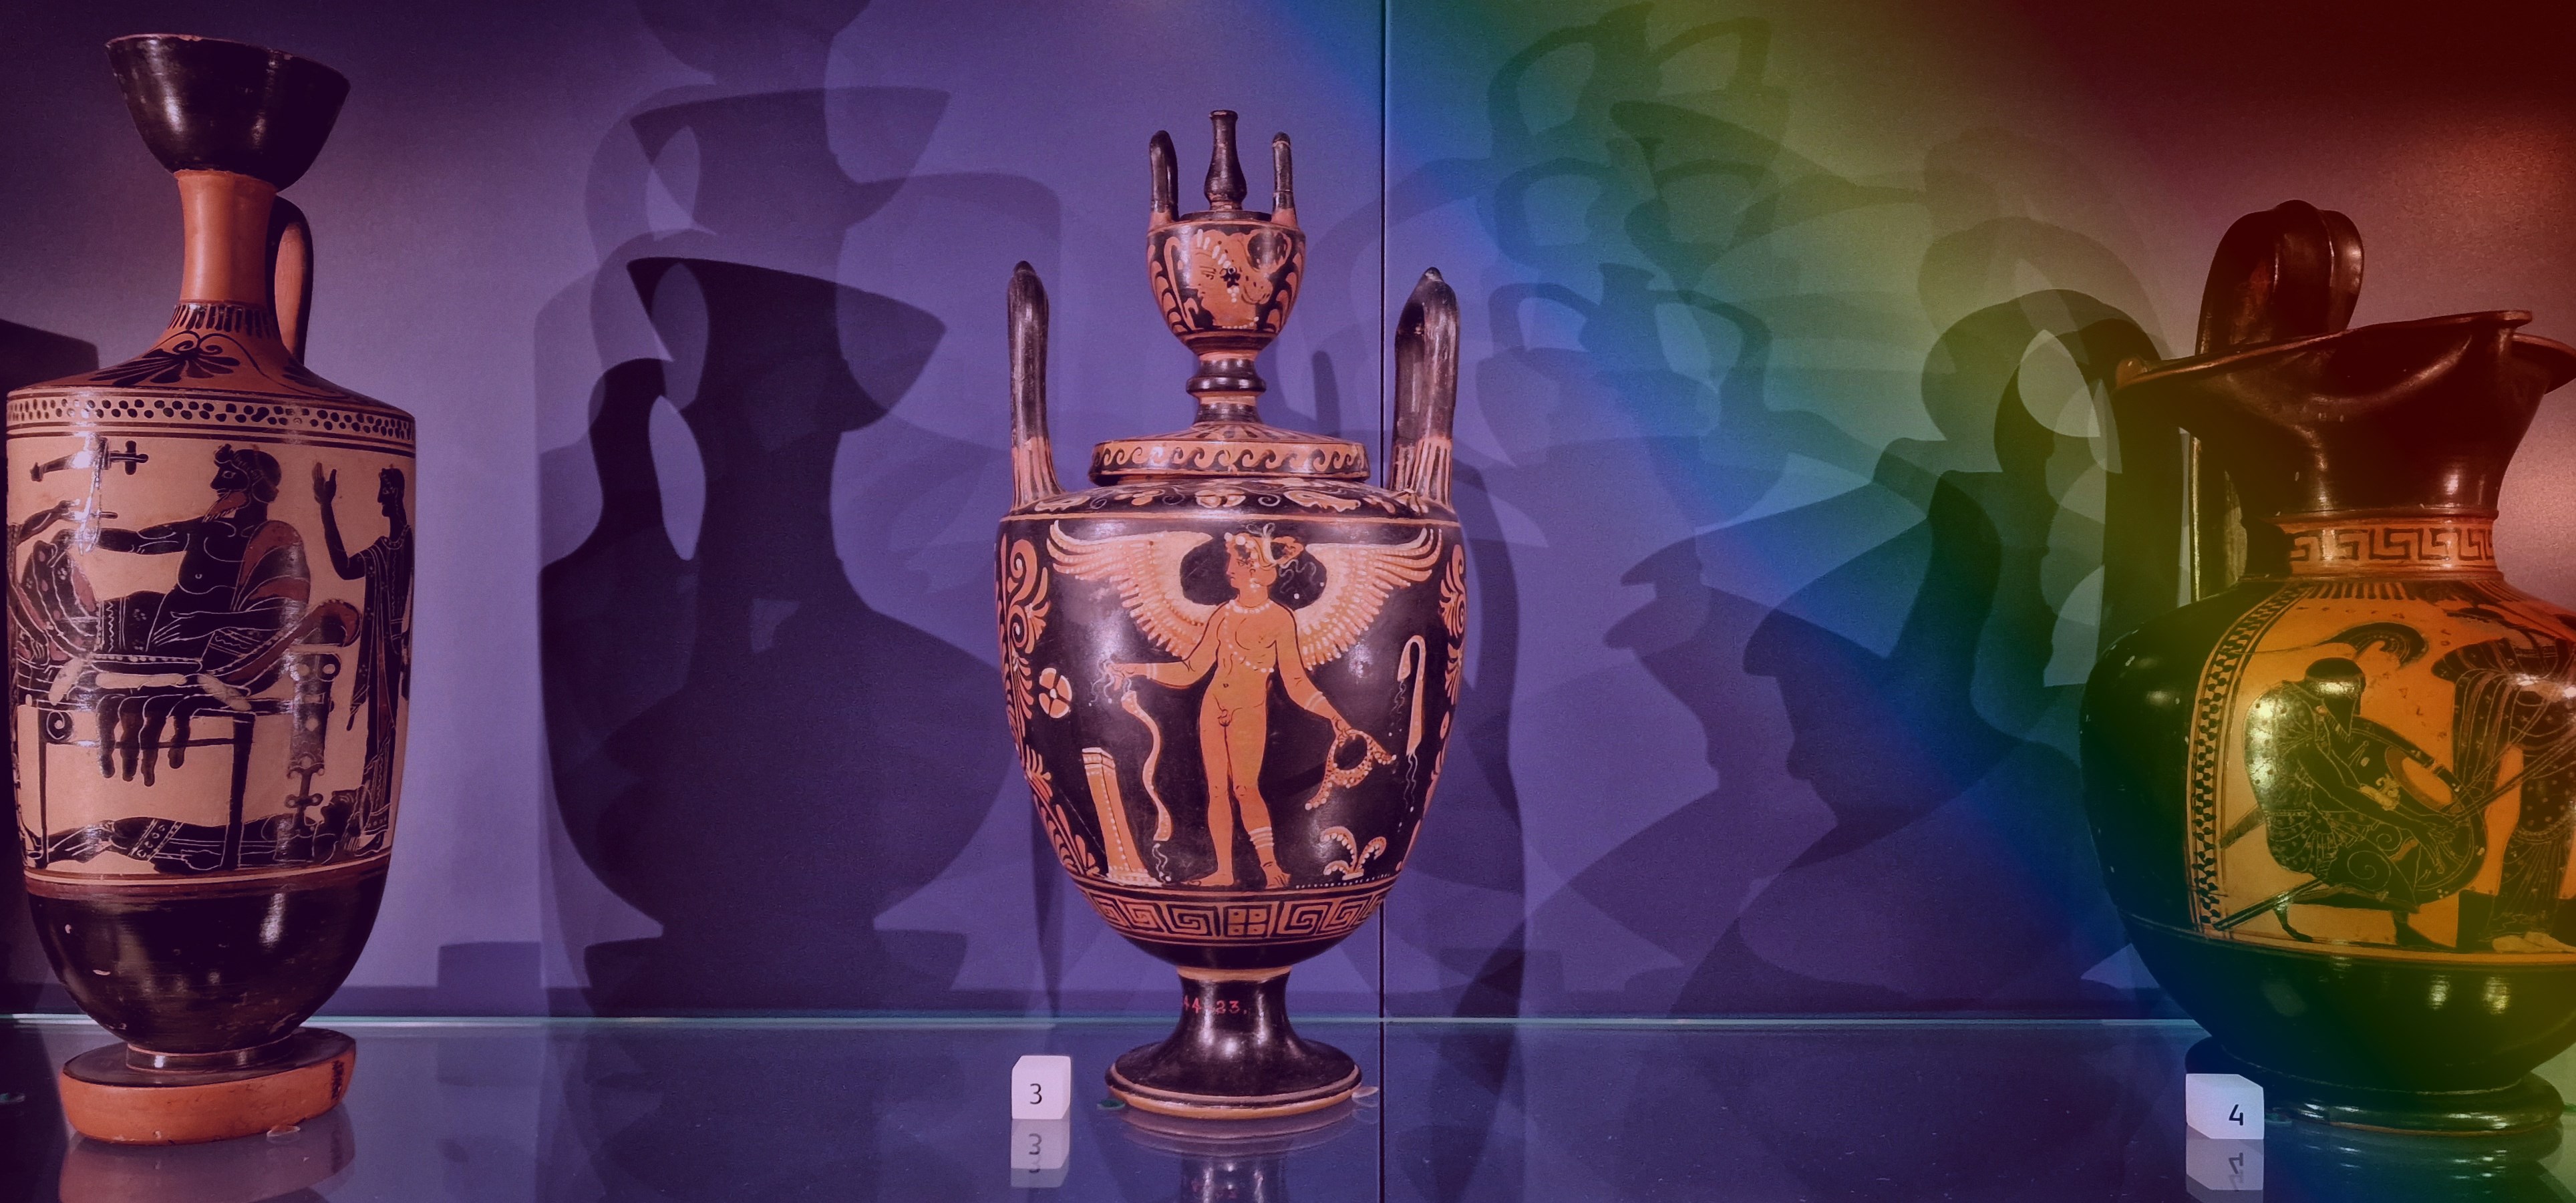 Urn depicting a naked human figure with wings. Image has a transparent rainbow overlay.